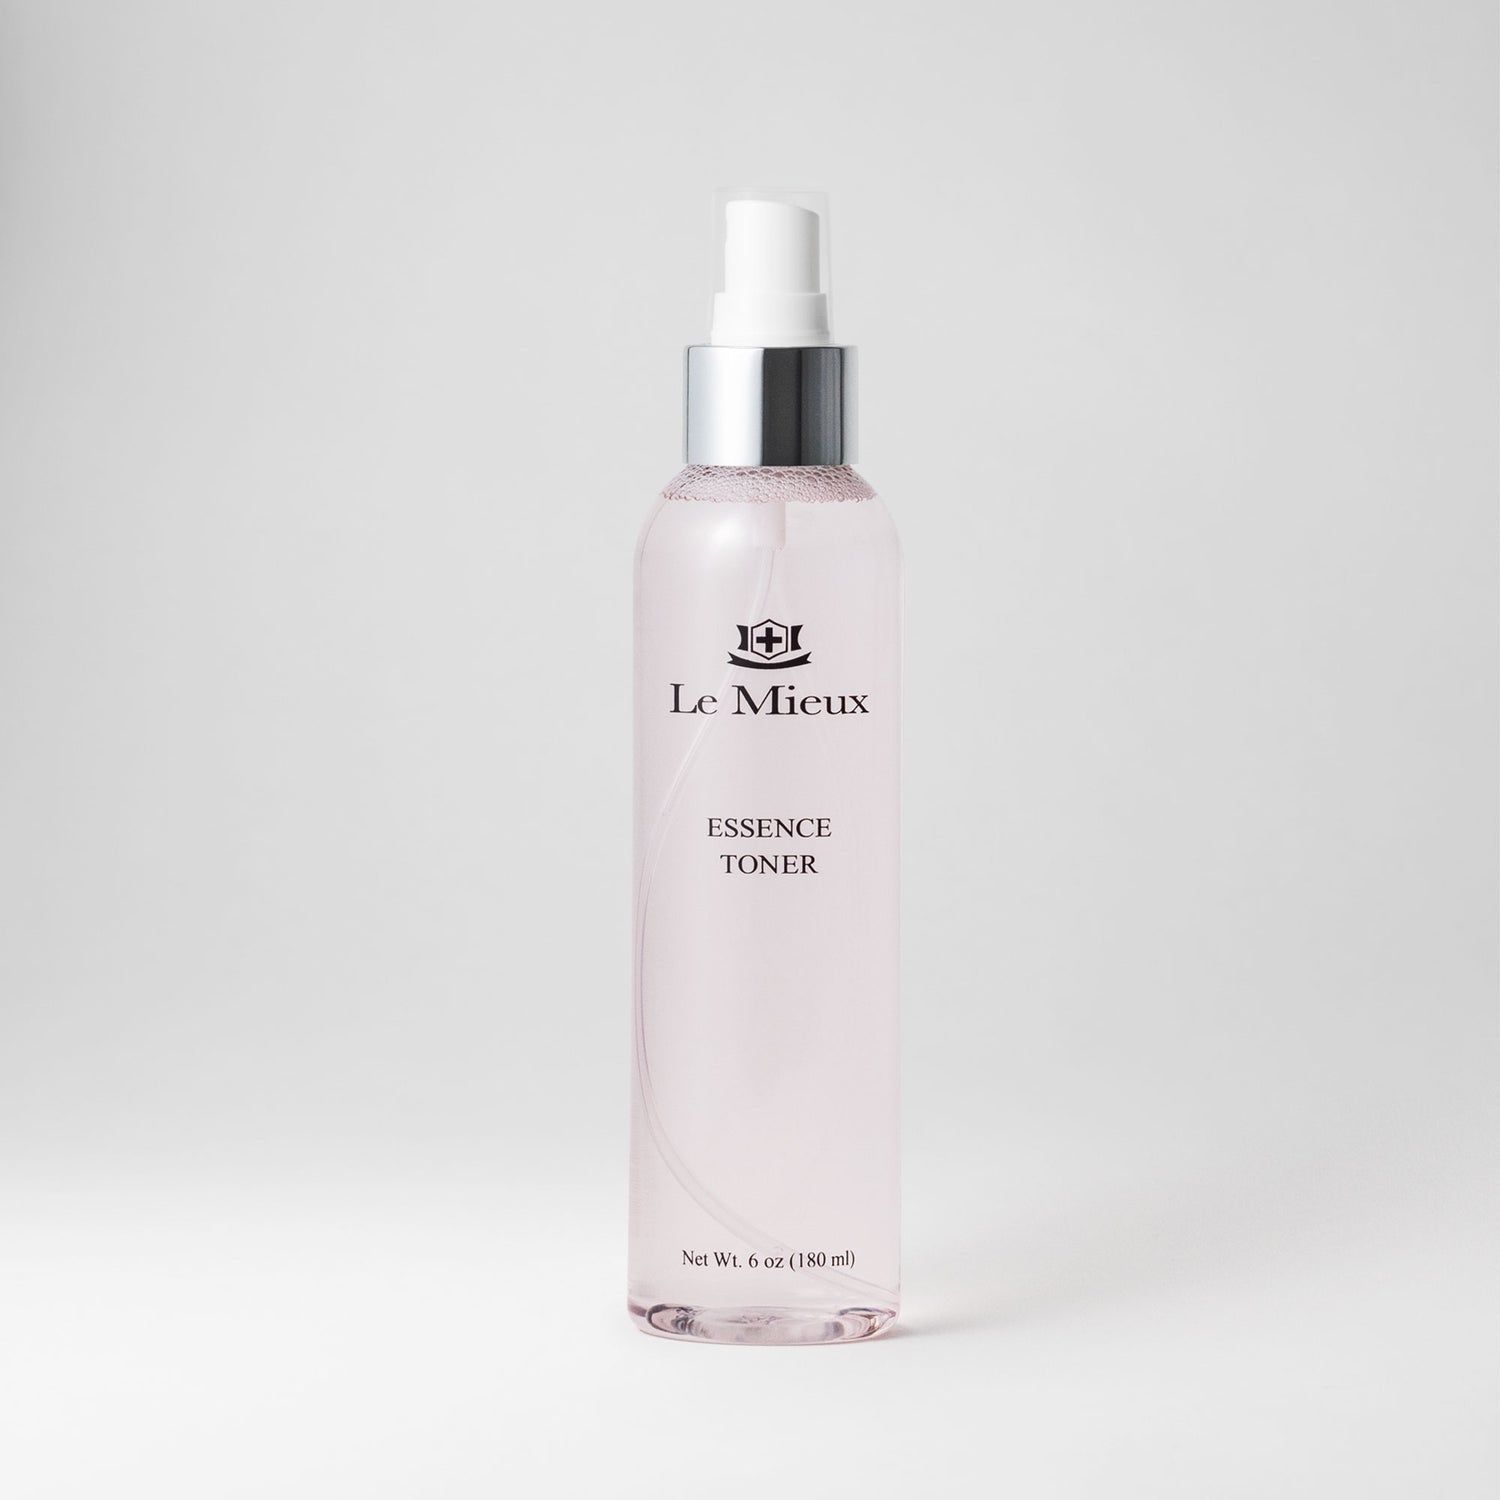  ESSENCE TONER from Le Mieux Skincare - featured